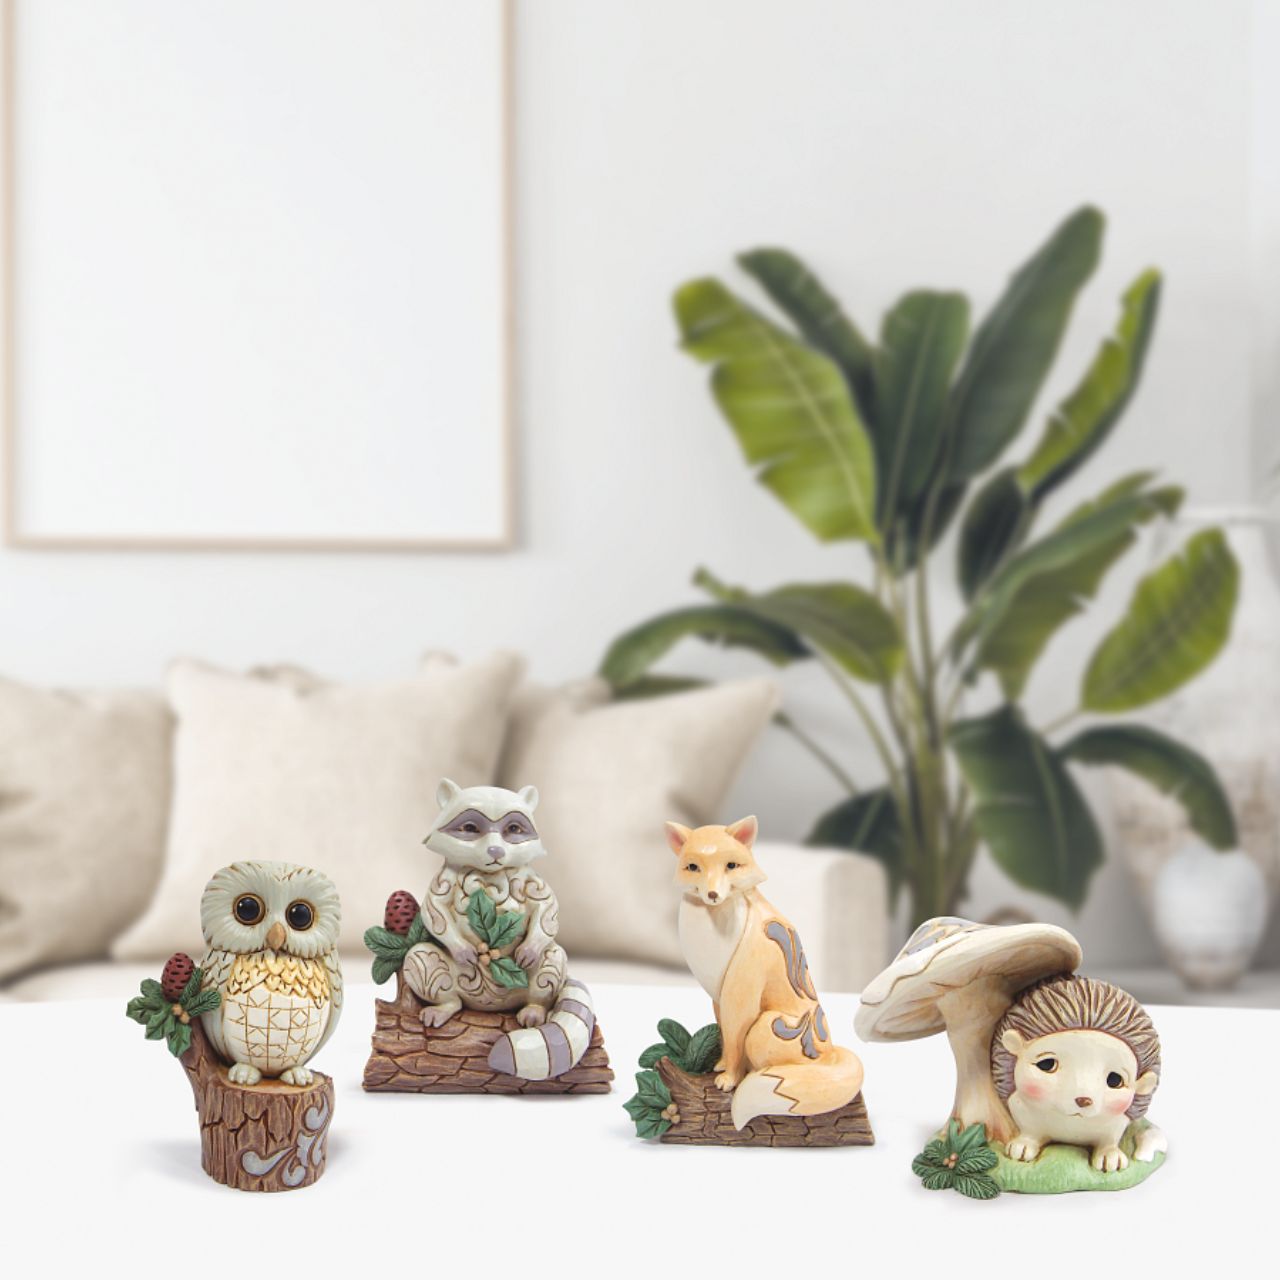 Jim Shore Raccoon with Pinecone Mini Figurine  The White Woodland Collection showcases Intricate Jim Shore designs, with soft neutral colour palette suitable for many styles of home décor. This magical collection on Minatare Figurines is a perfect gift for anyone wanting to start a White Woodland Collection.